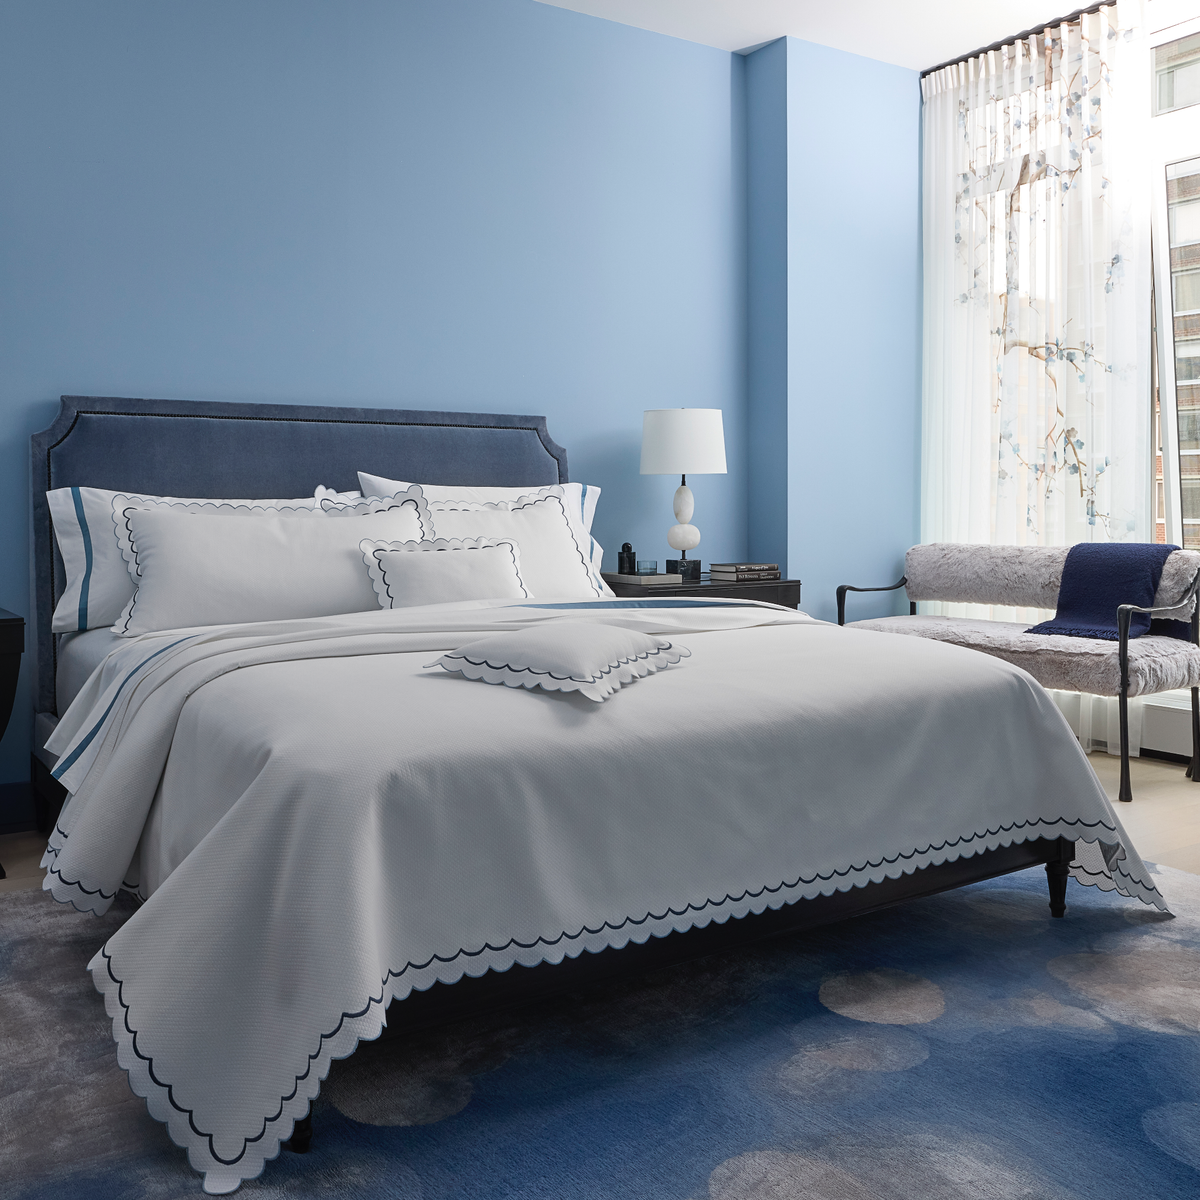 Full Bedding in a Room Dressed in Matouk India Pique Collection in Hazy Blue Color